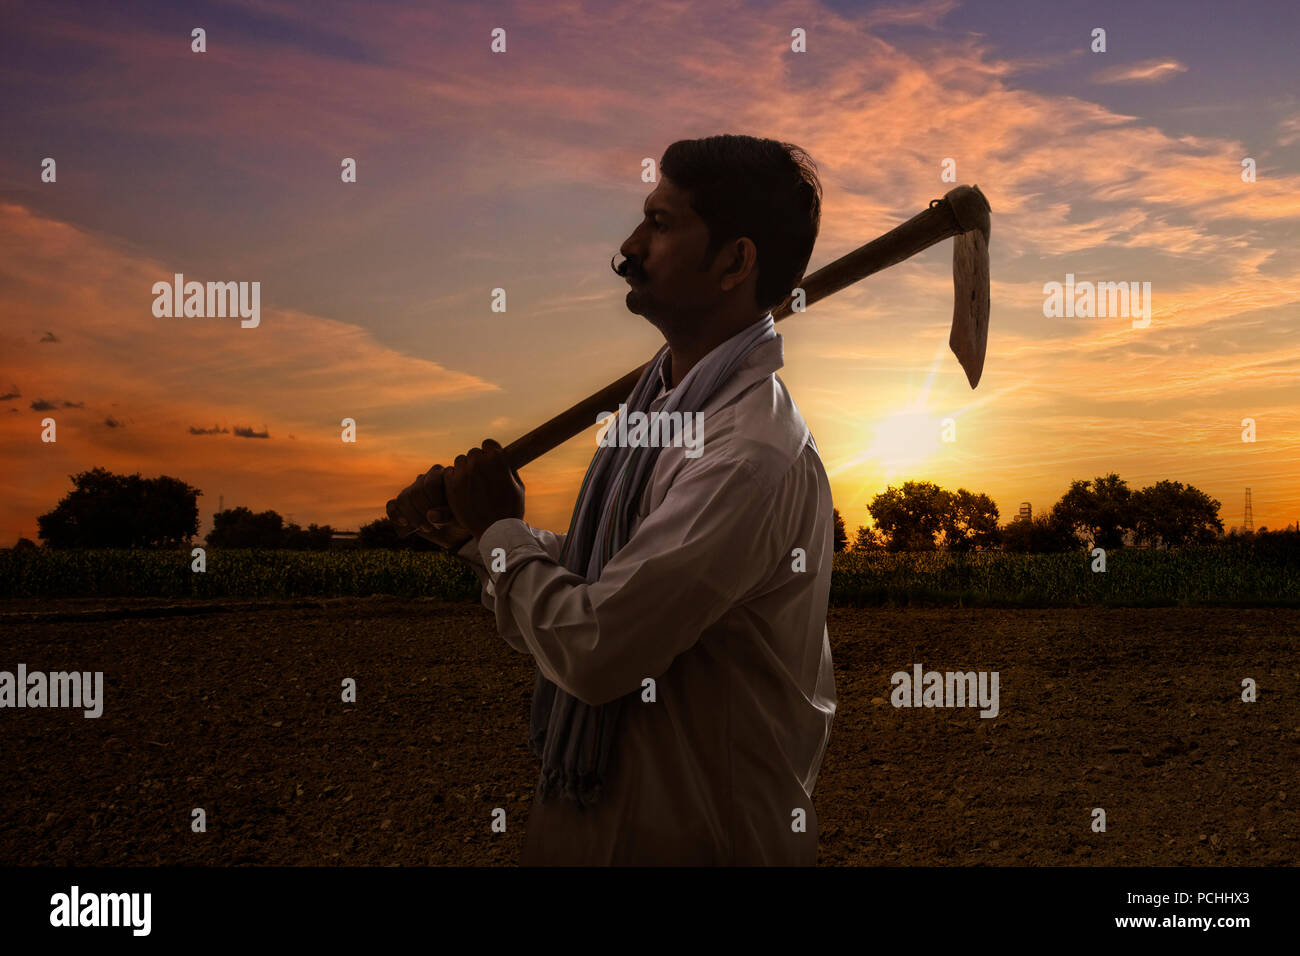 Indian farmer carrying hoe on his shoulder standing in field at sunrise Stock Photo